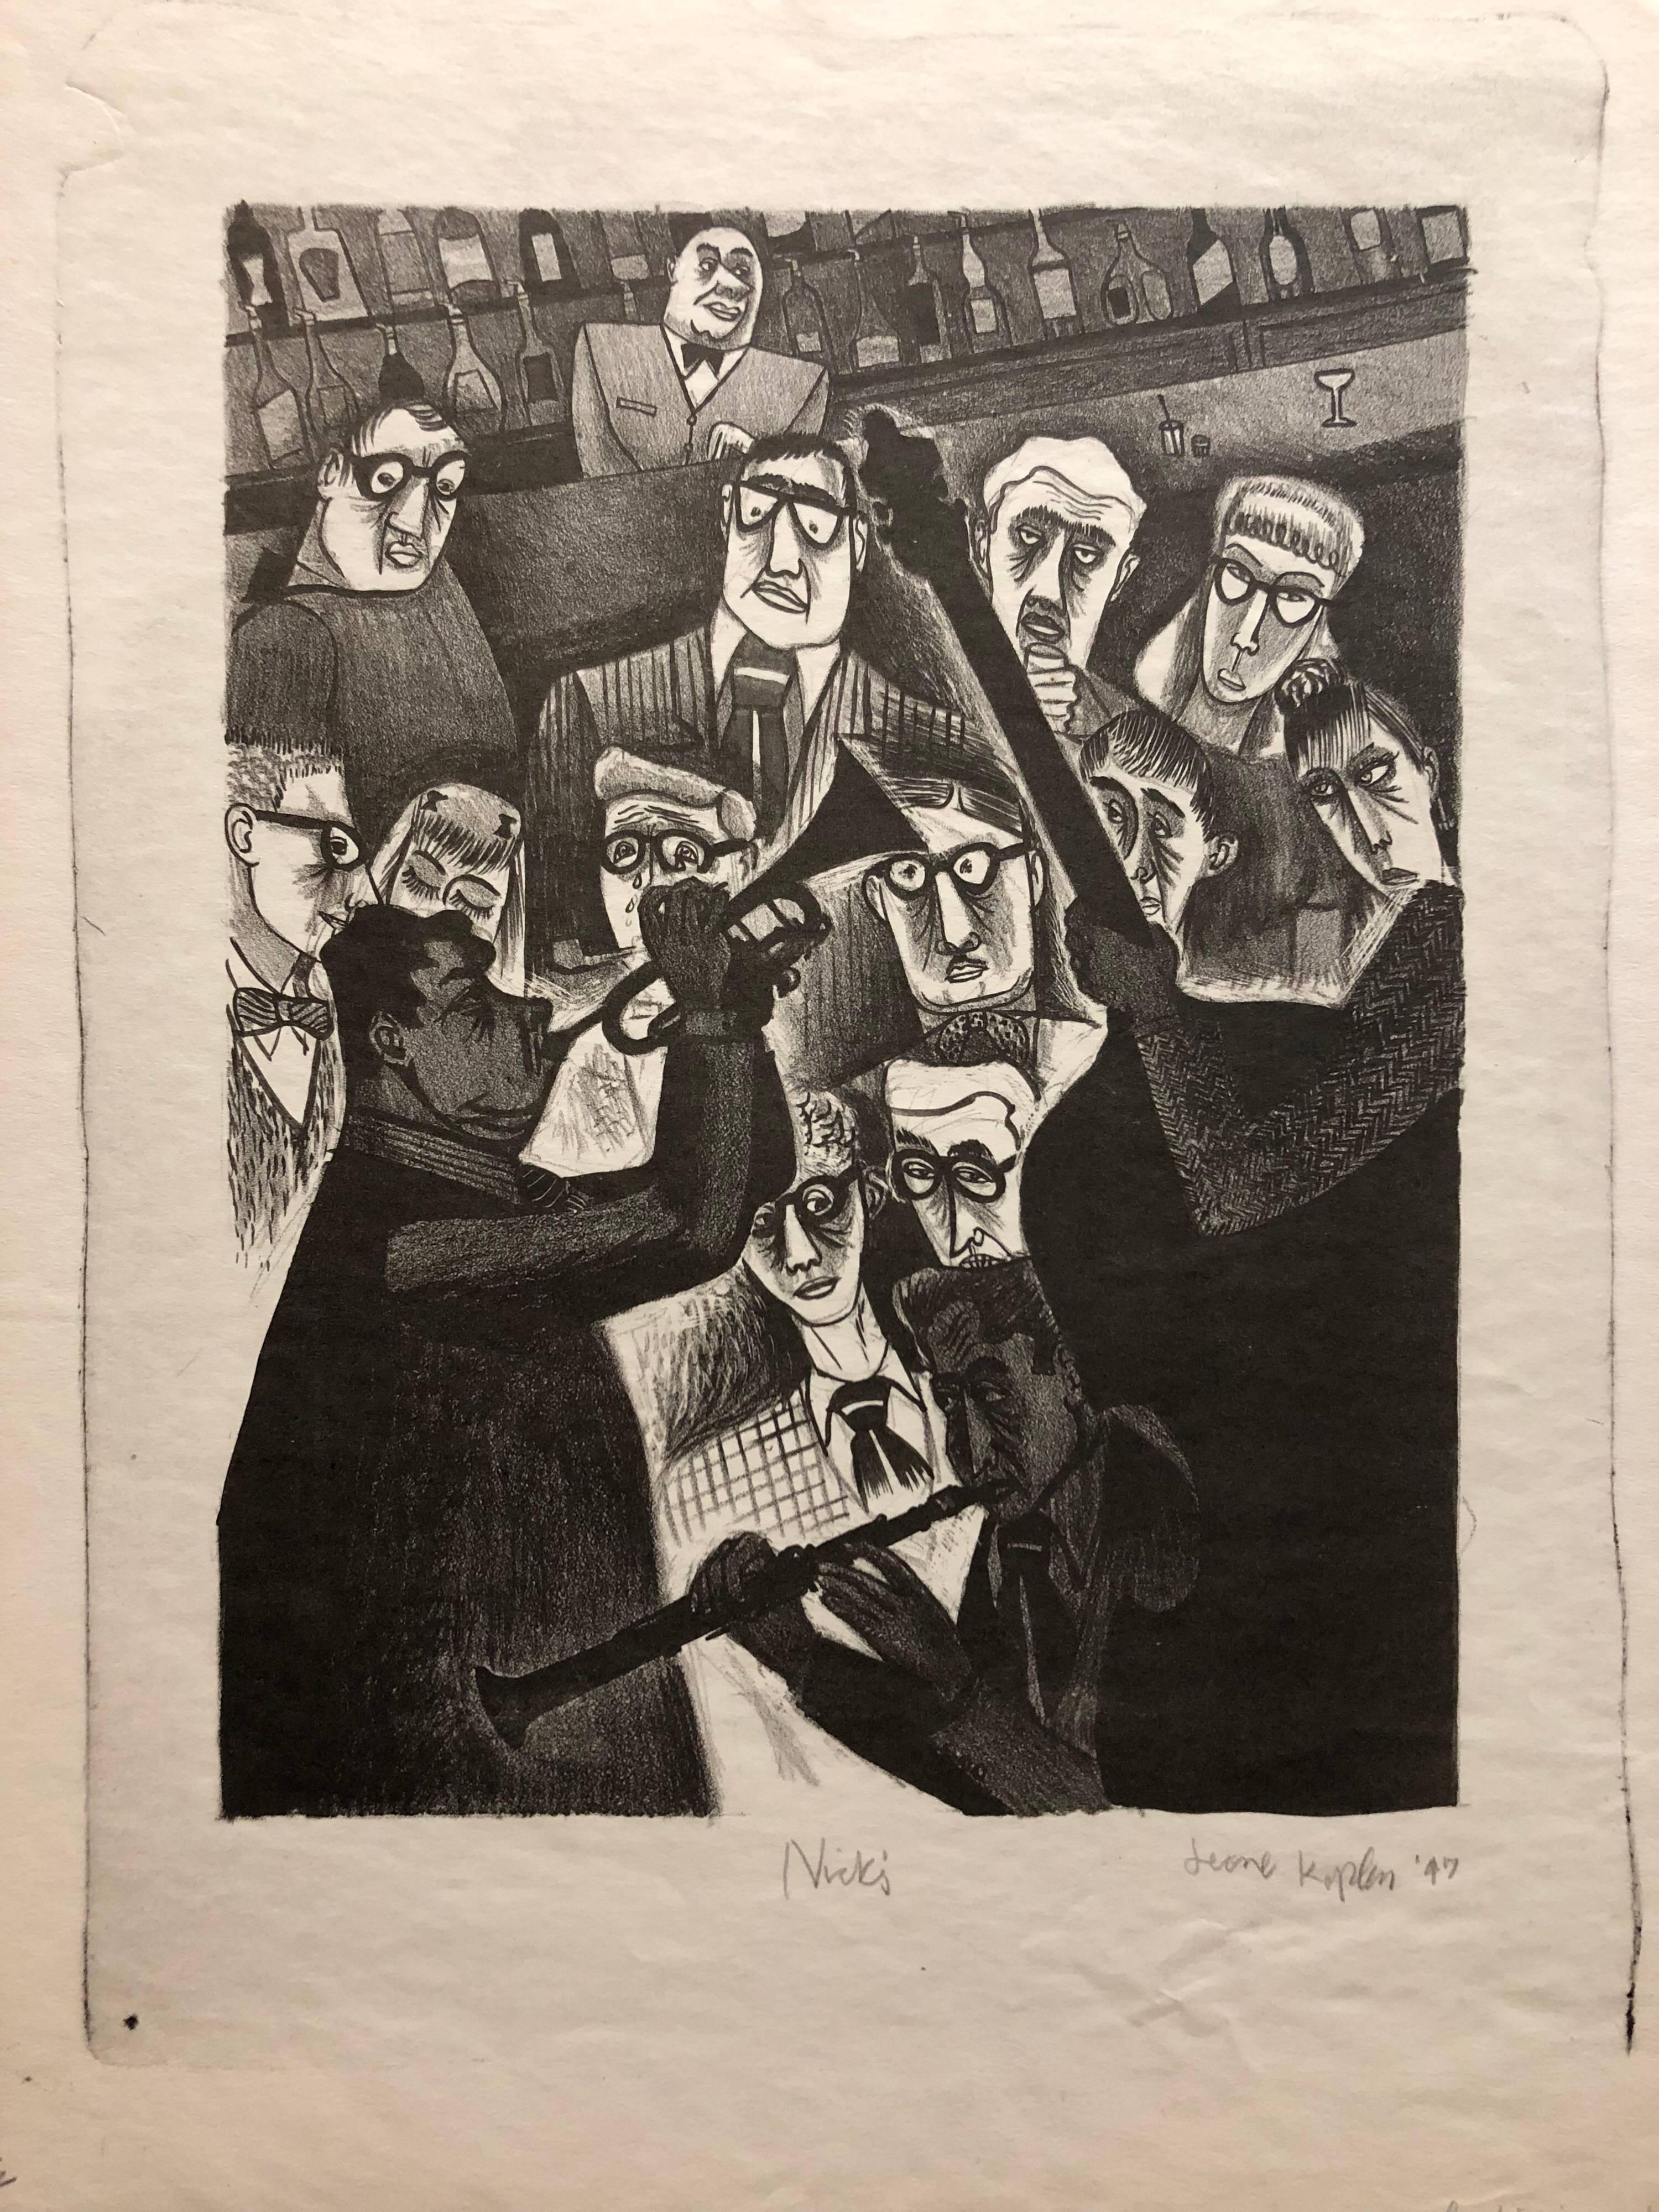 Jerome Kaplan Figurative Print - The Critic or Nick's 1947 Lithograph Jazz Band